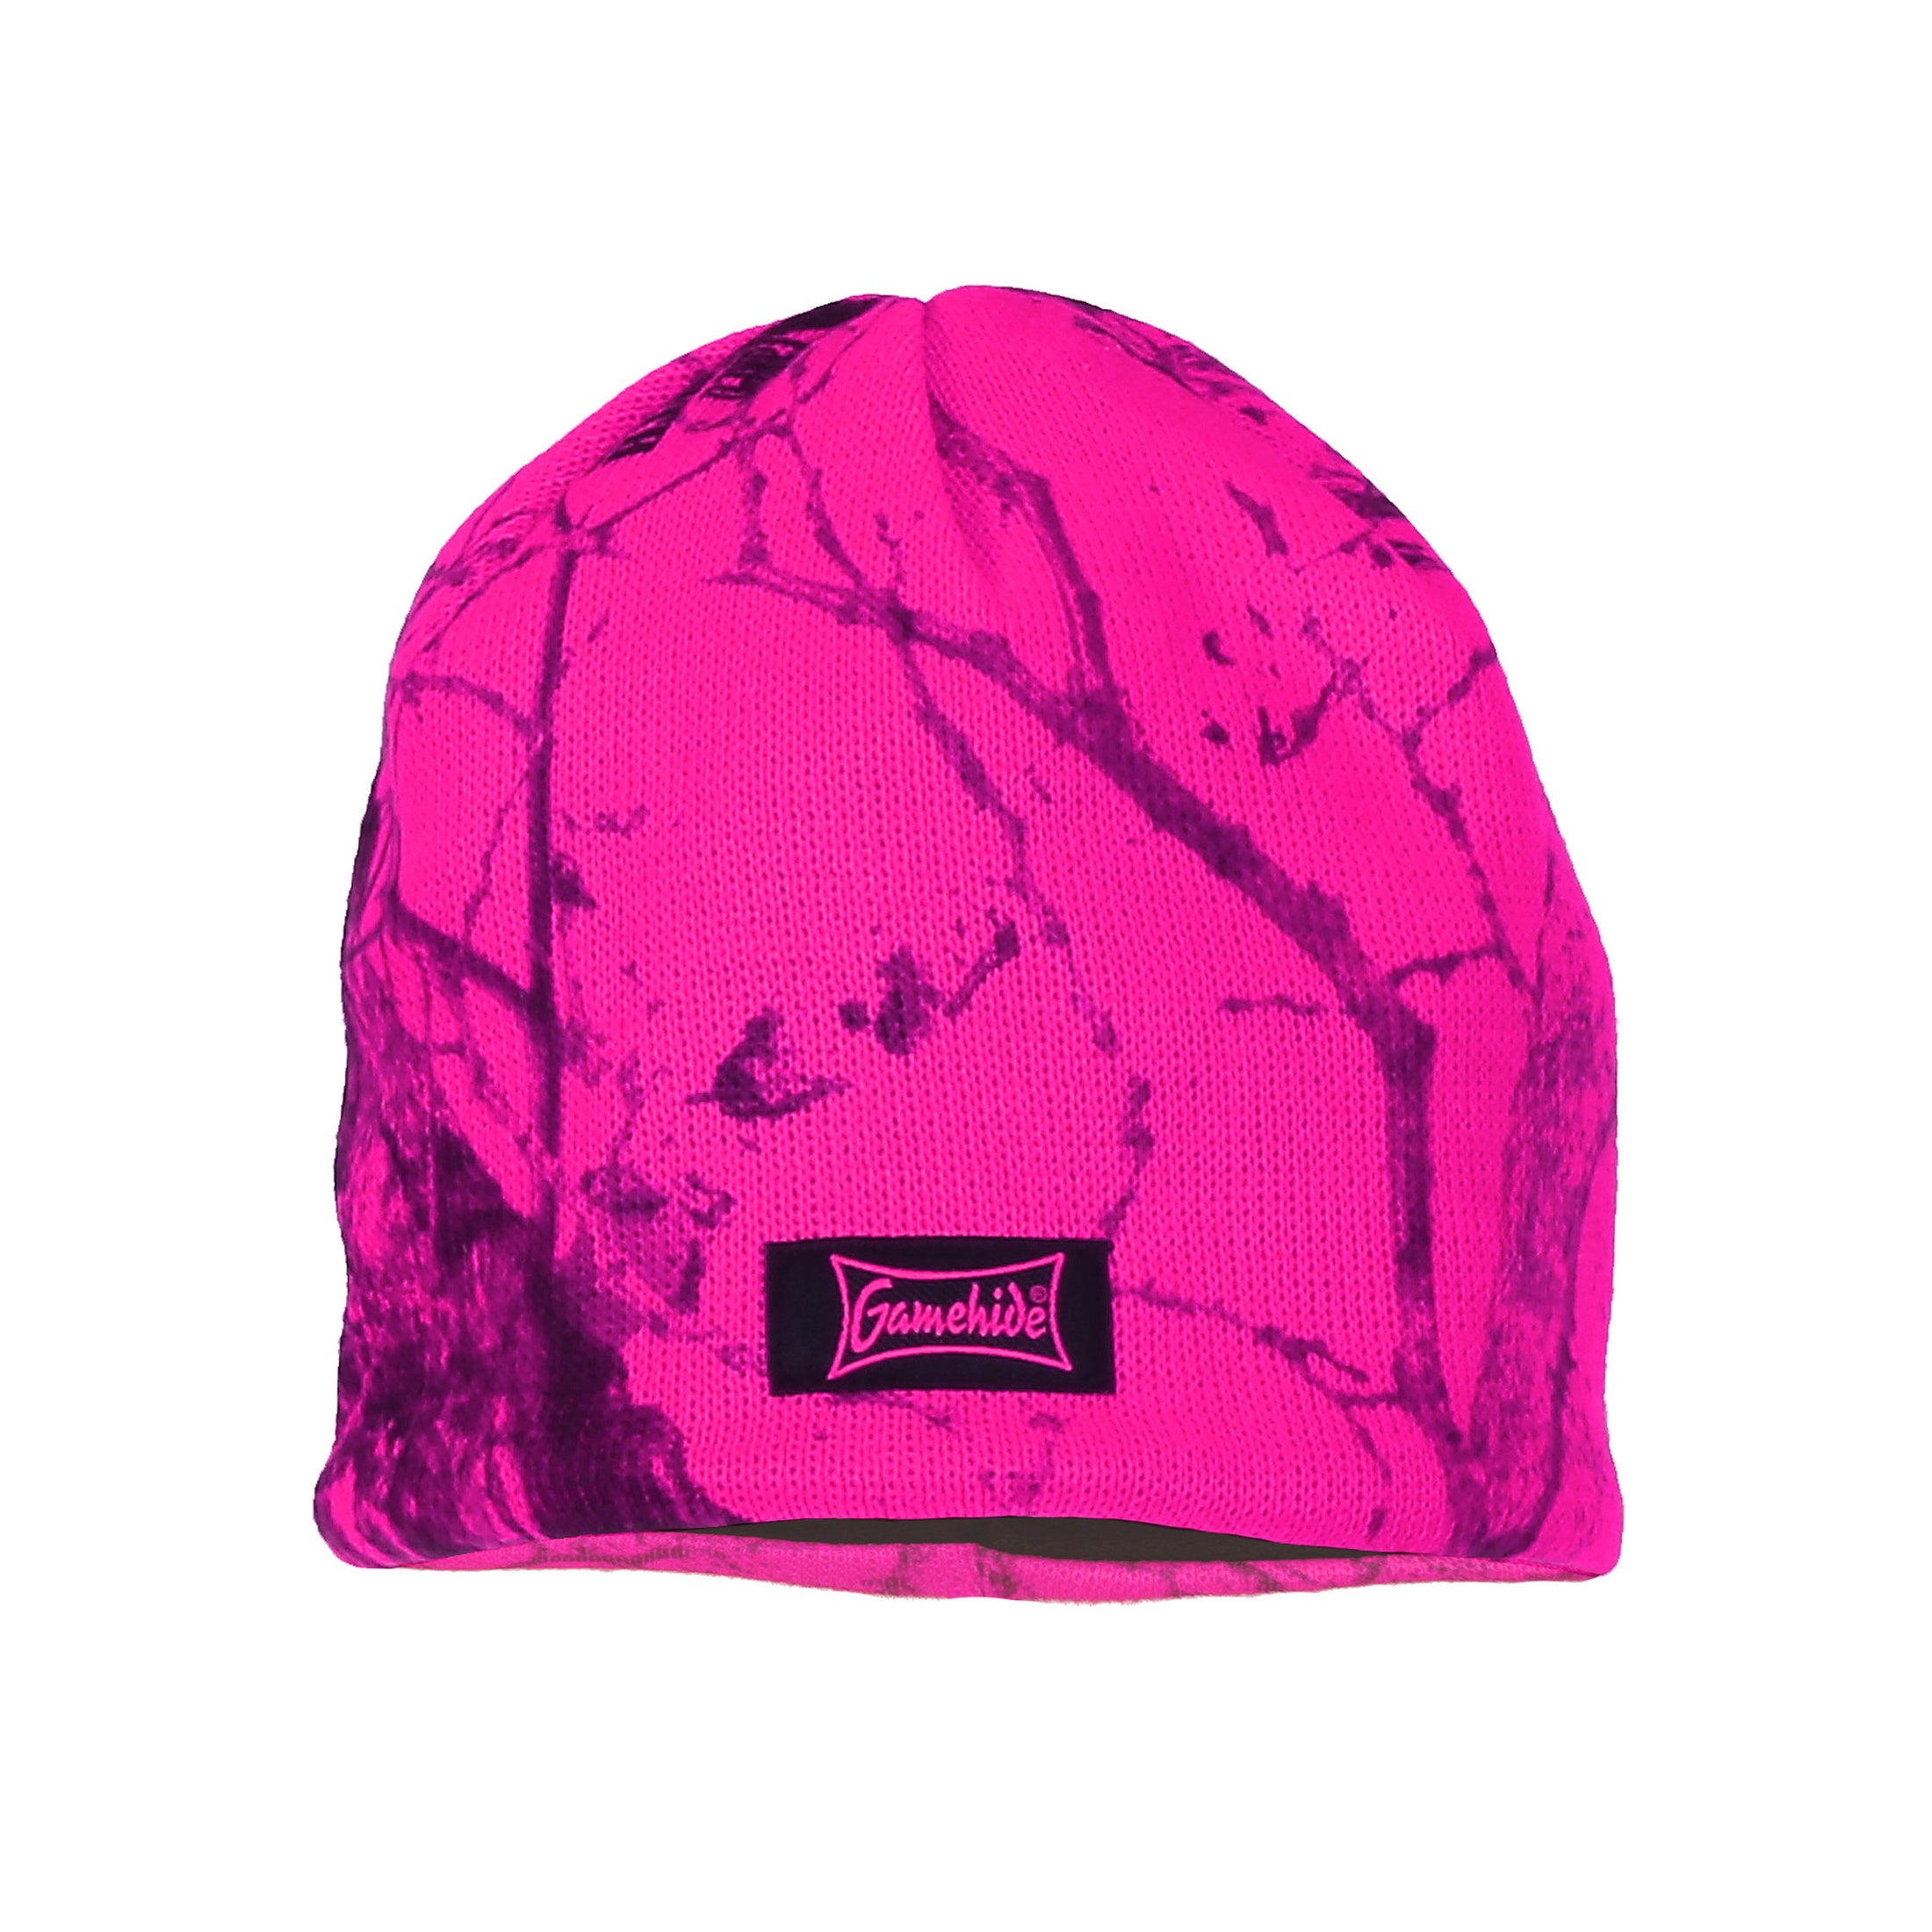 gamehide youth skulll cap (naked north blaze pink camo)